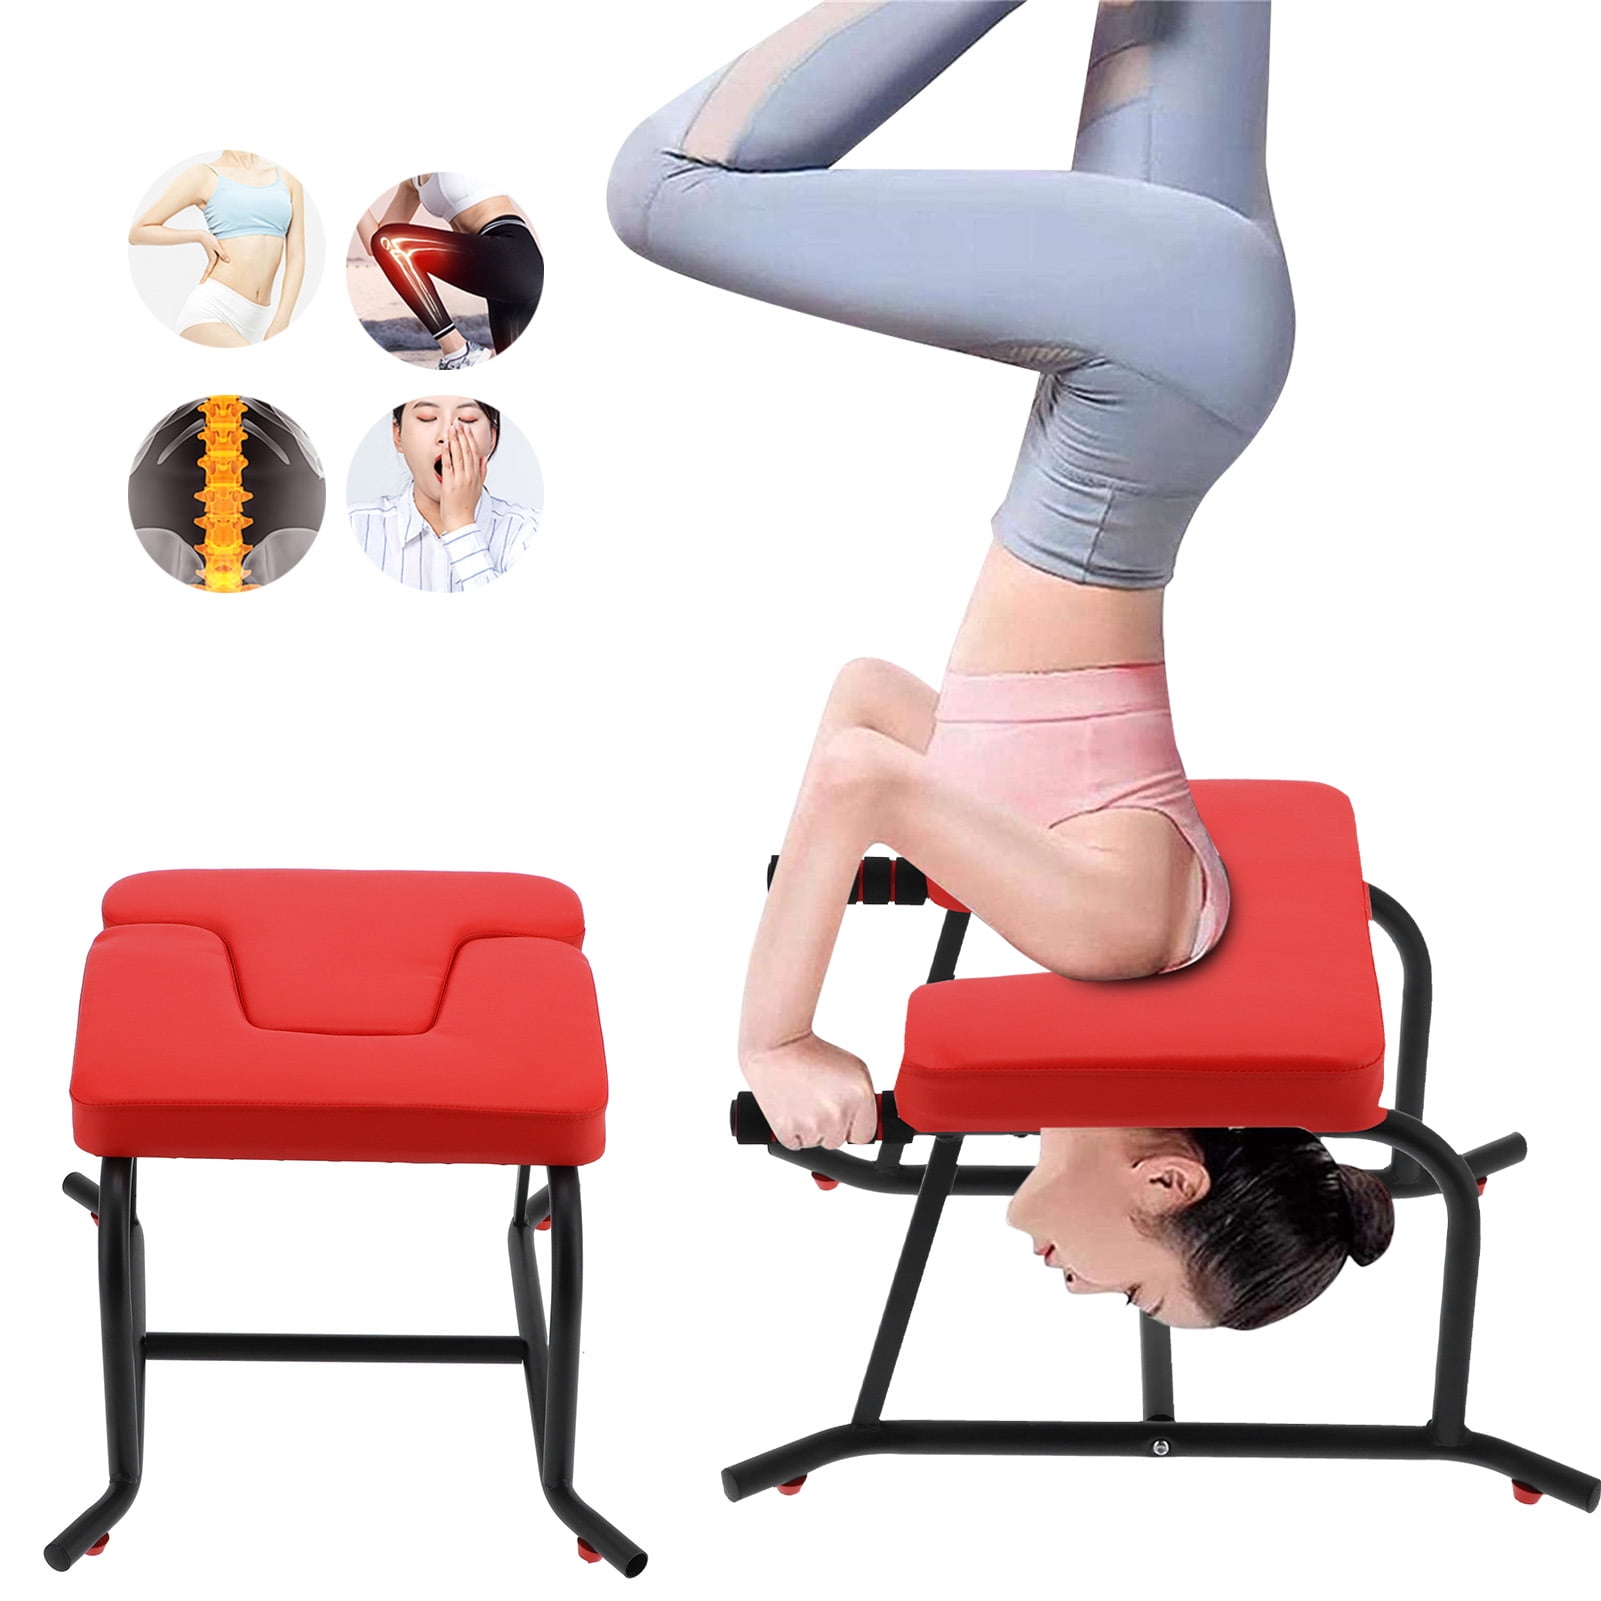 Yoga Chair Inversion Bench Body Lifting Kit Gym Head Table Weight Loss Gifts